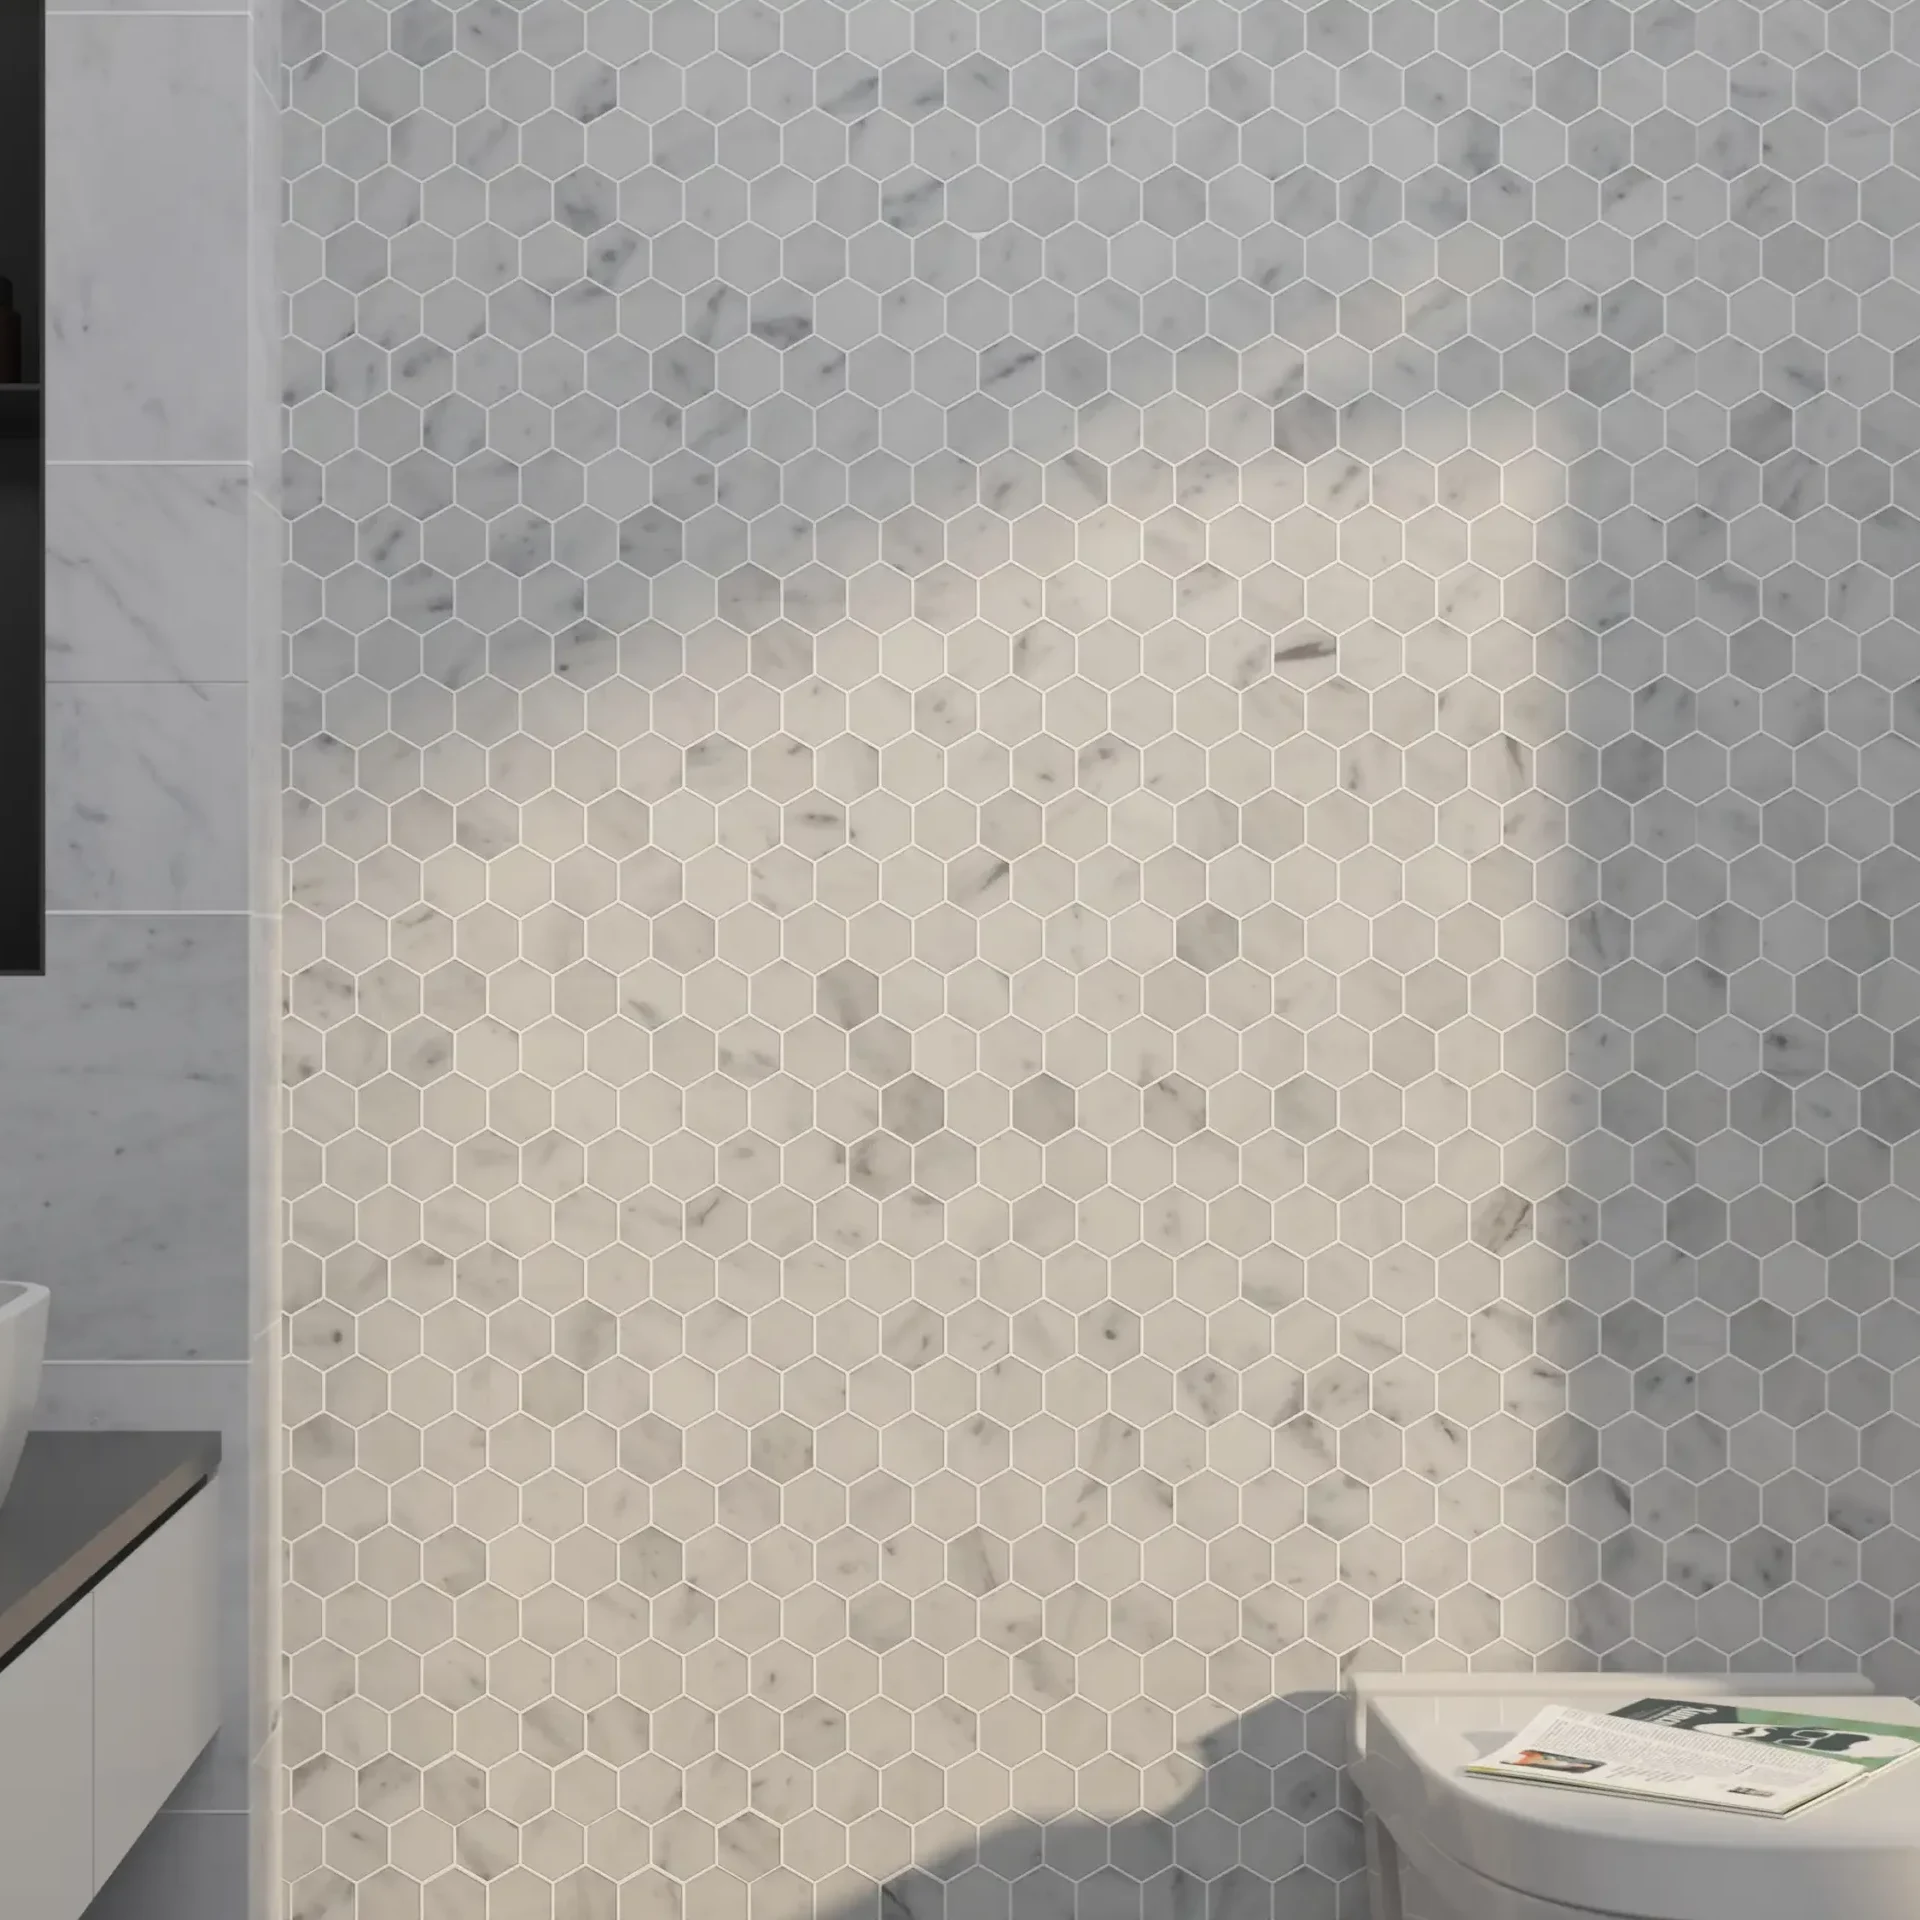 Bathroom wall with installed 2x2 Marble Polished Hexagon Mosaic Tile